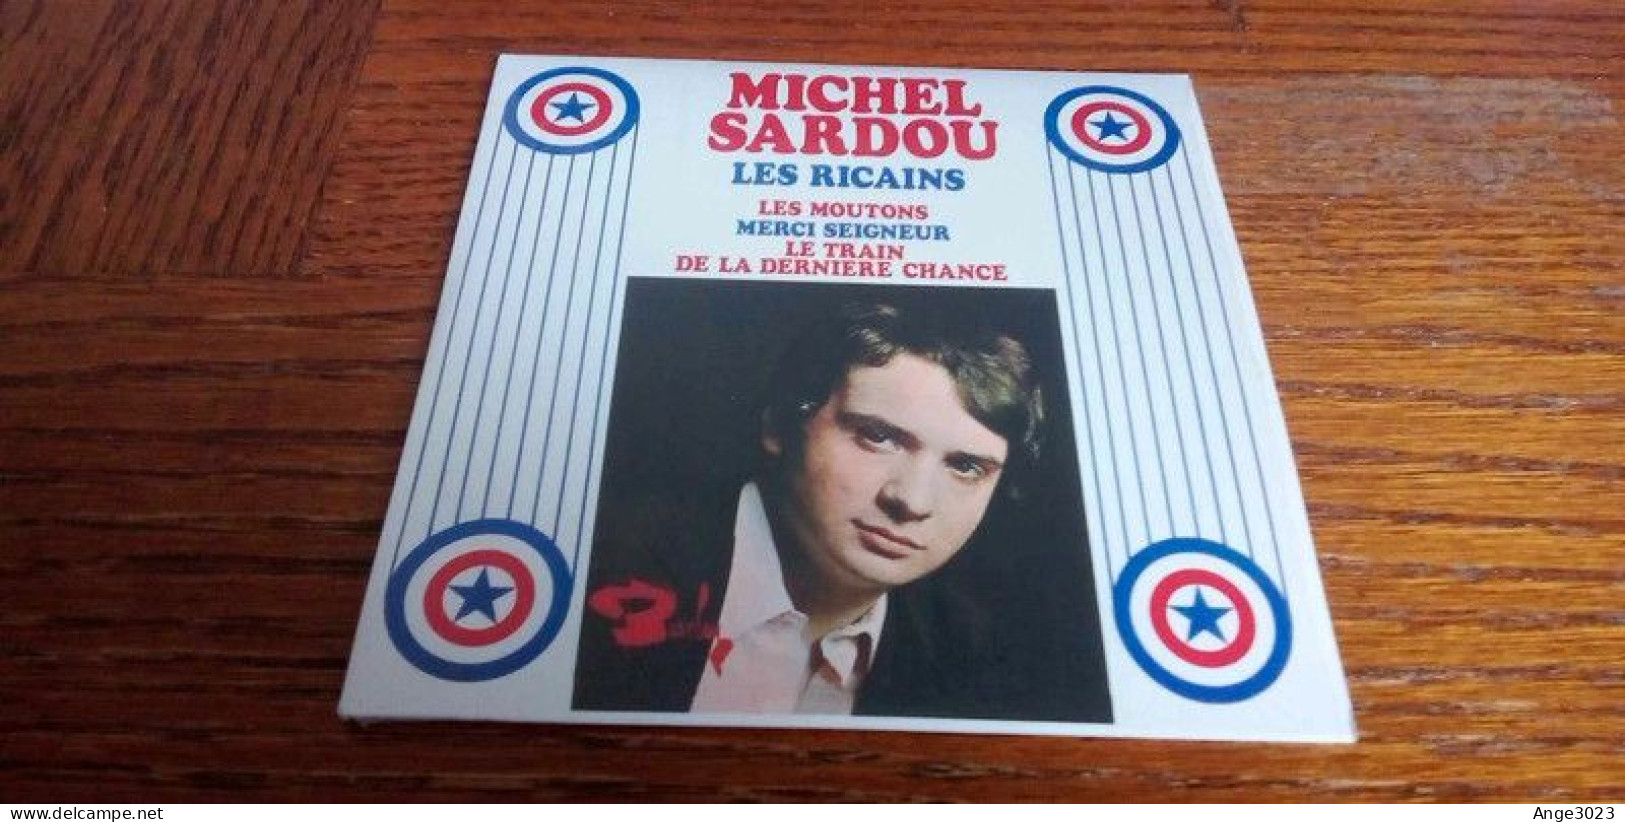 MICHEL SARDOU "Les Ricains" - Other - French Music